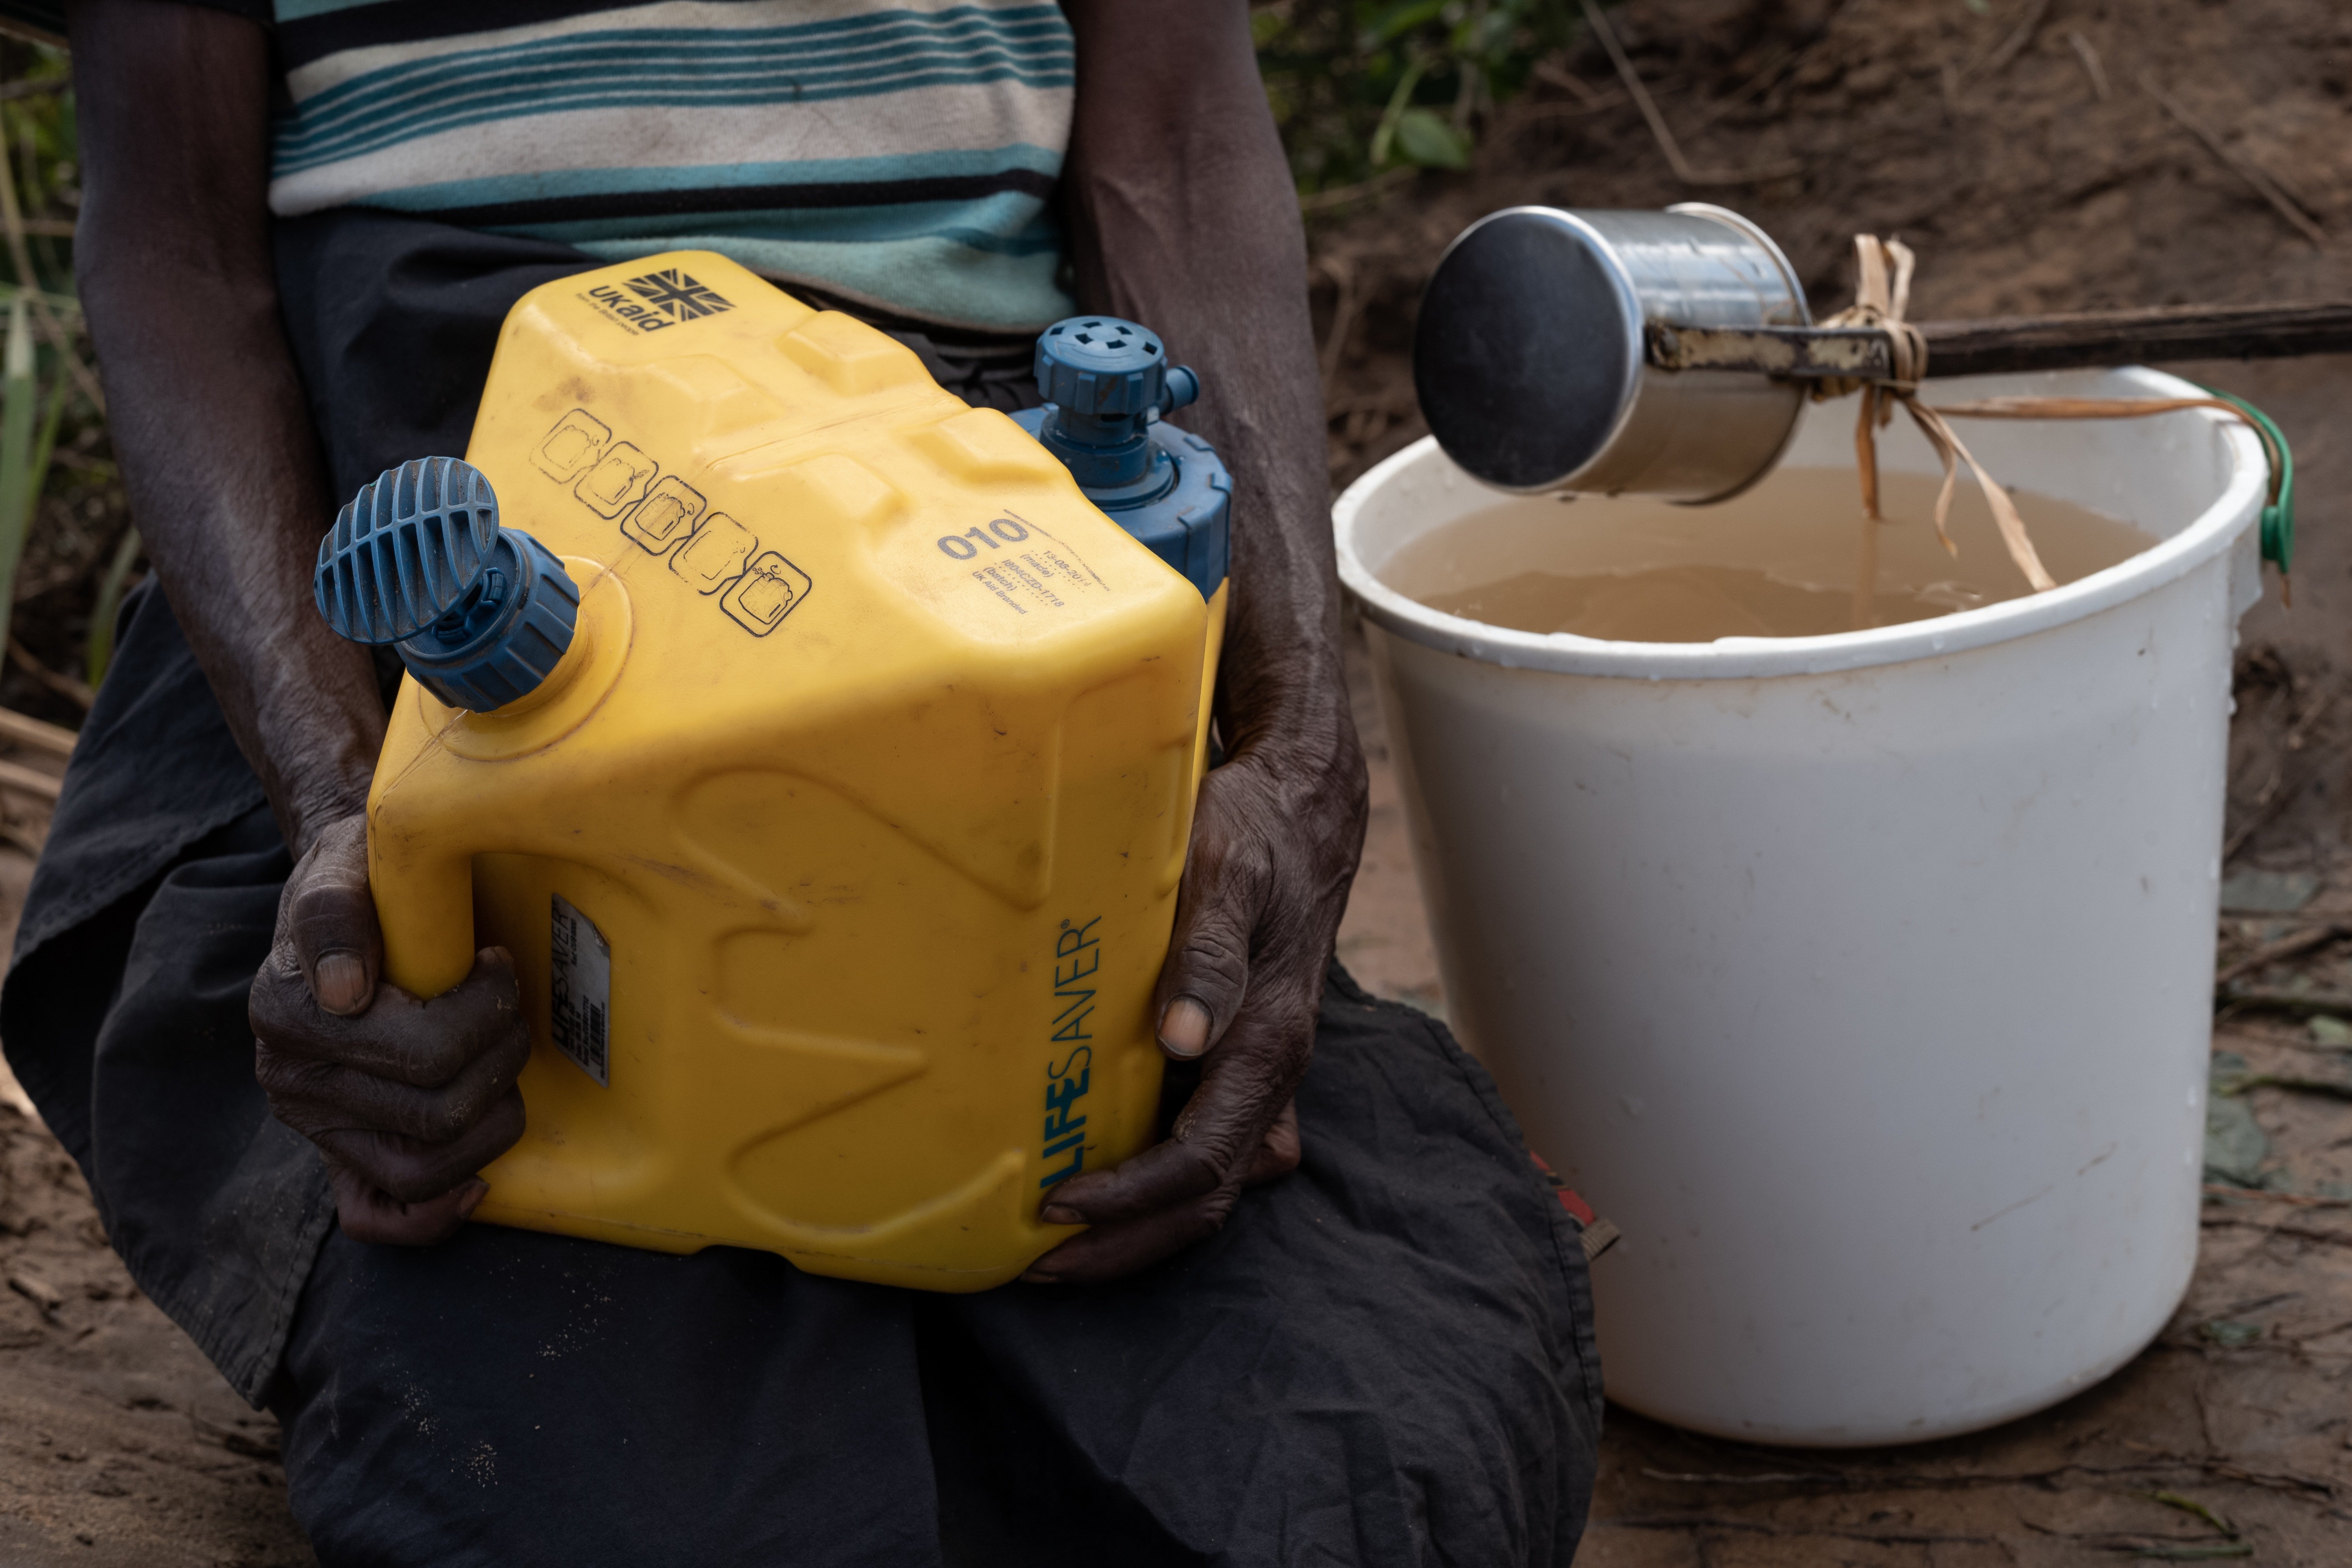 Many of the water sources were contaminated by flood water. People could have clean water with the handheld household filter distributed by Oxfam. (Photo: Ko Chung Ming / Oxfam Volunteer Photographer)